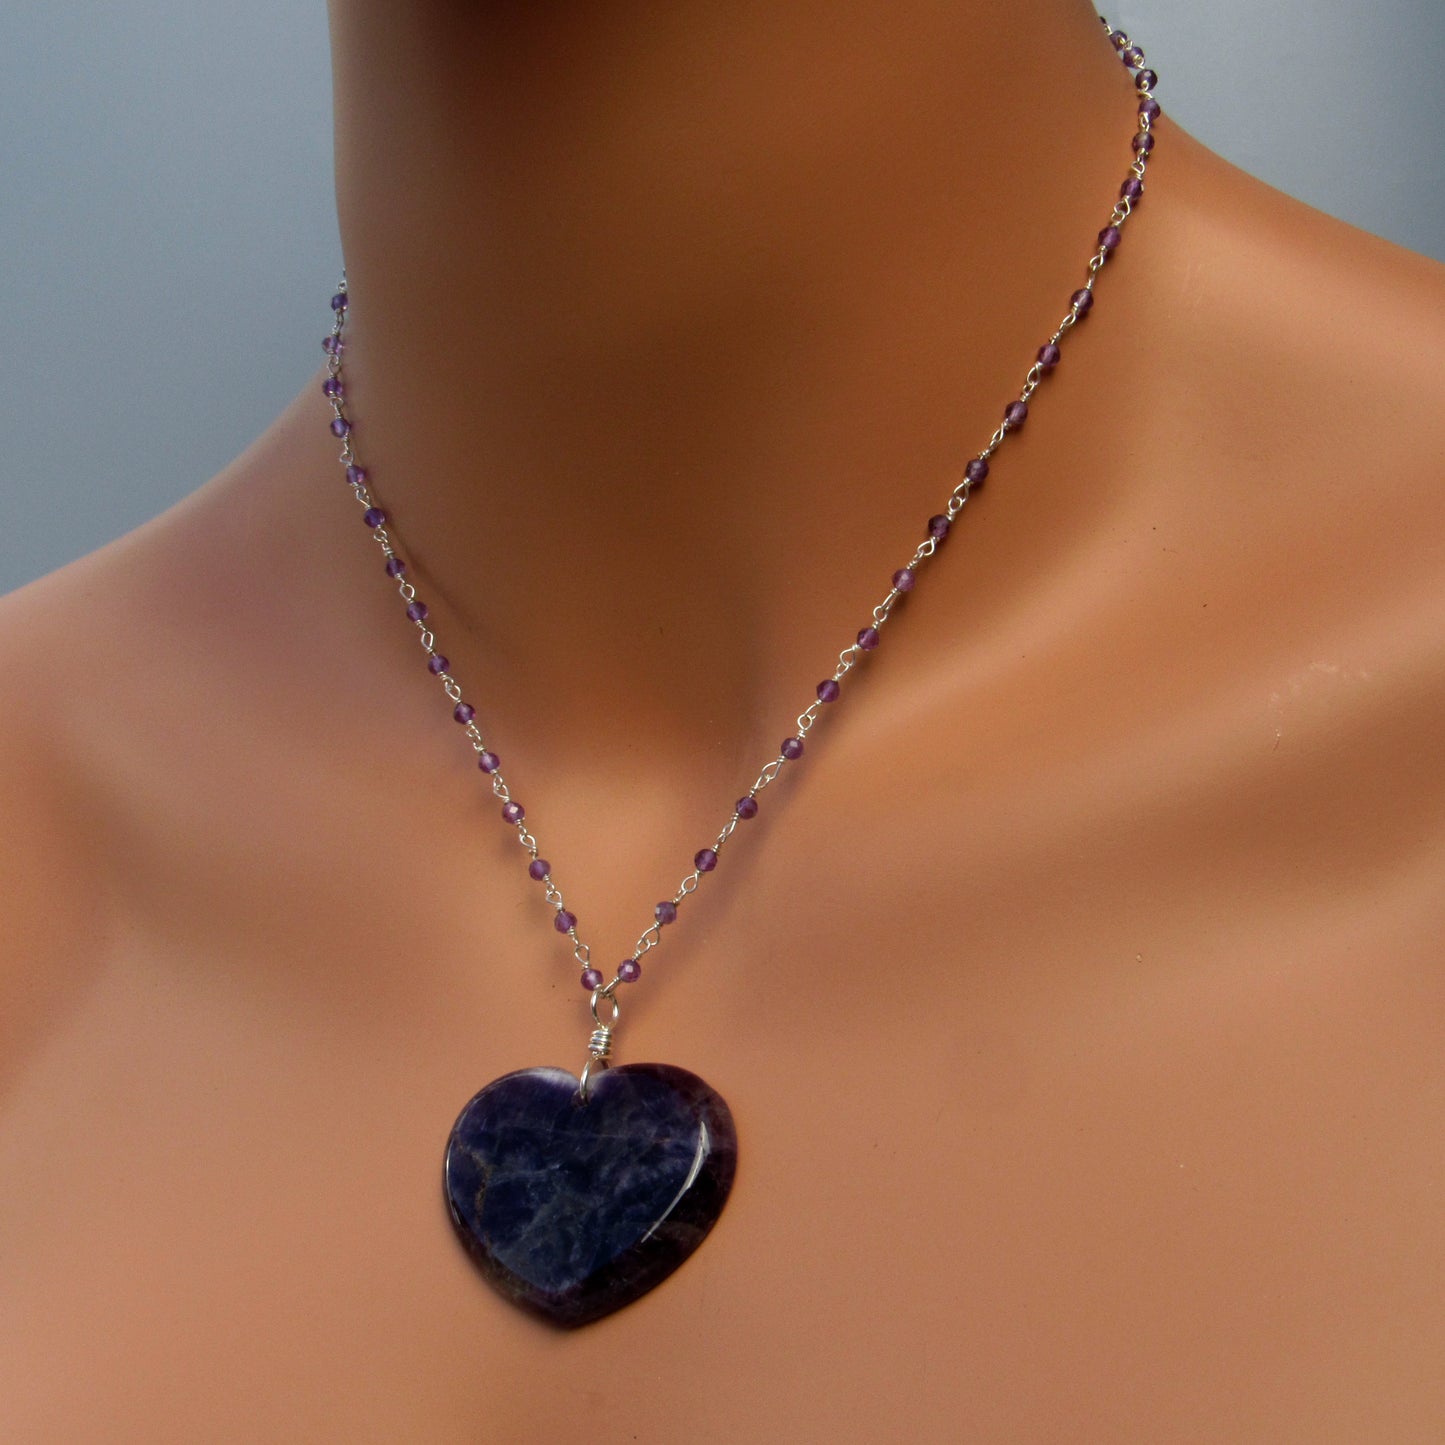 Amethyst gemstone Heart Pendant on Sterling Silver Chain Necklace